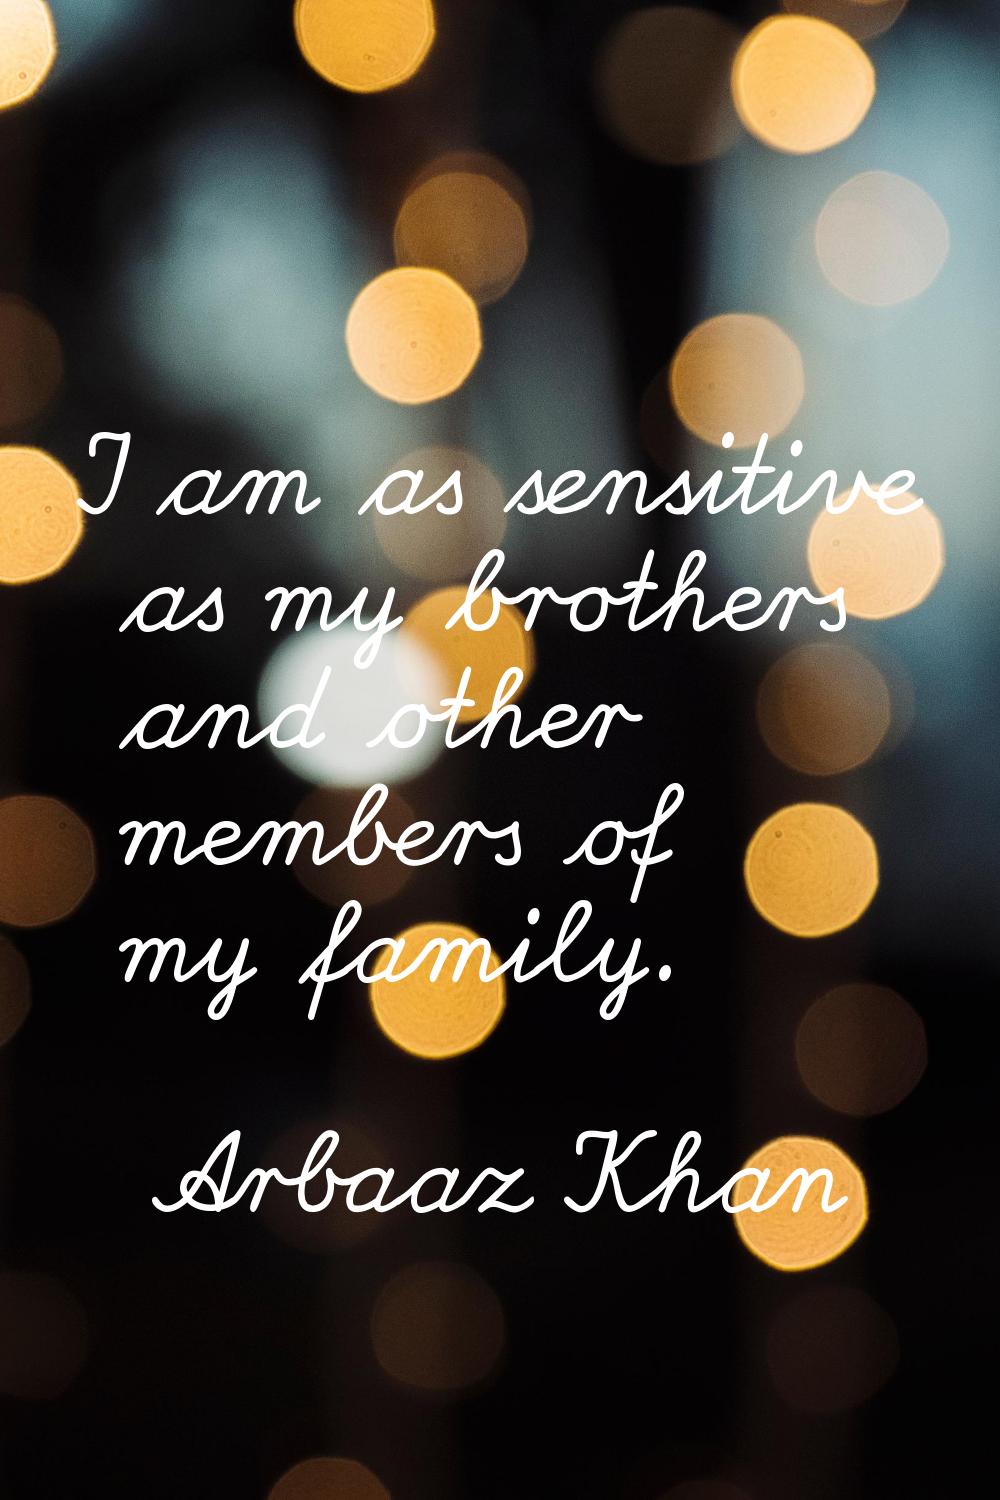 I am as sensitive as my brothers and other members of my family.